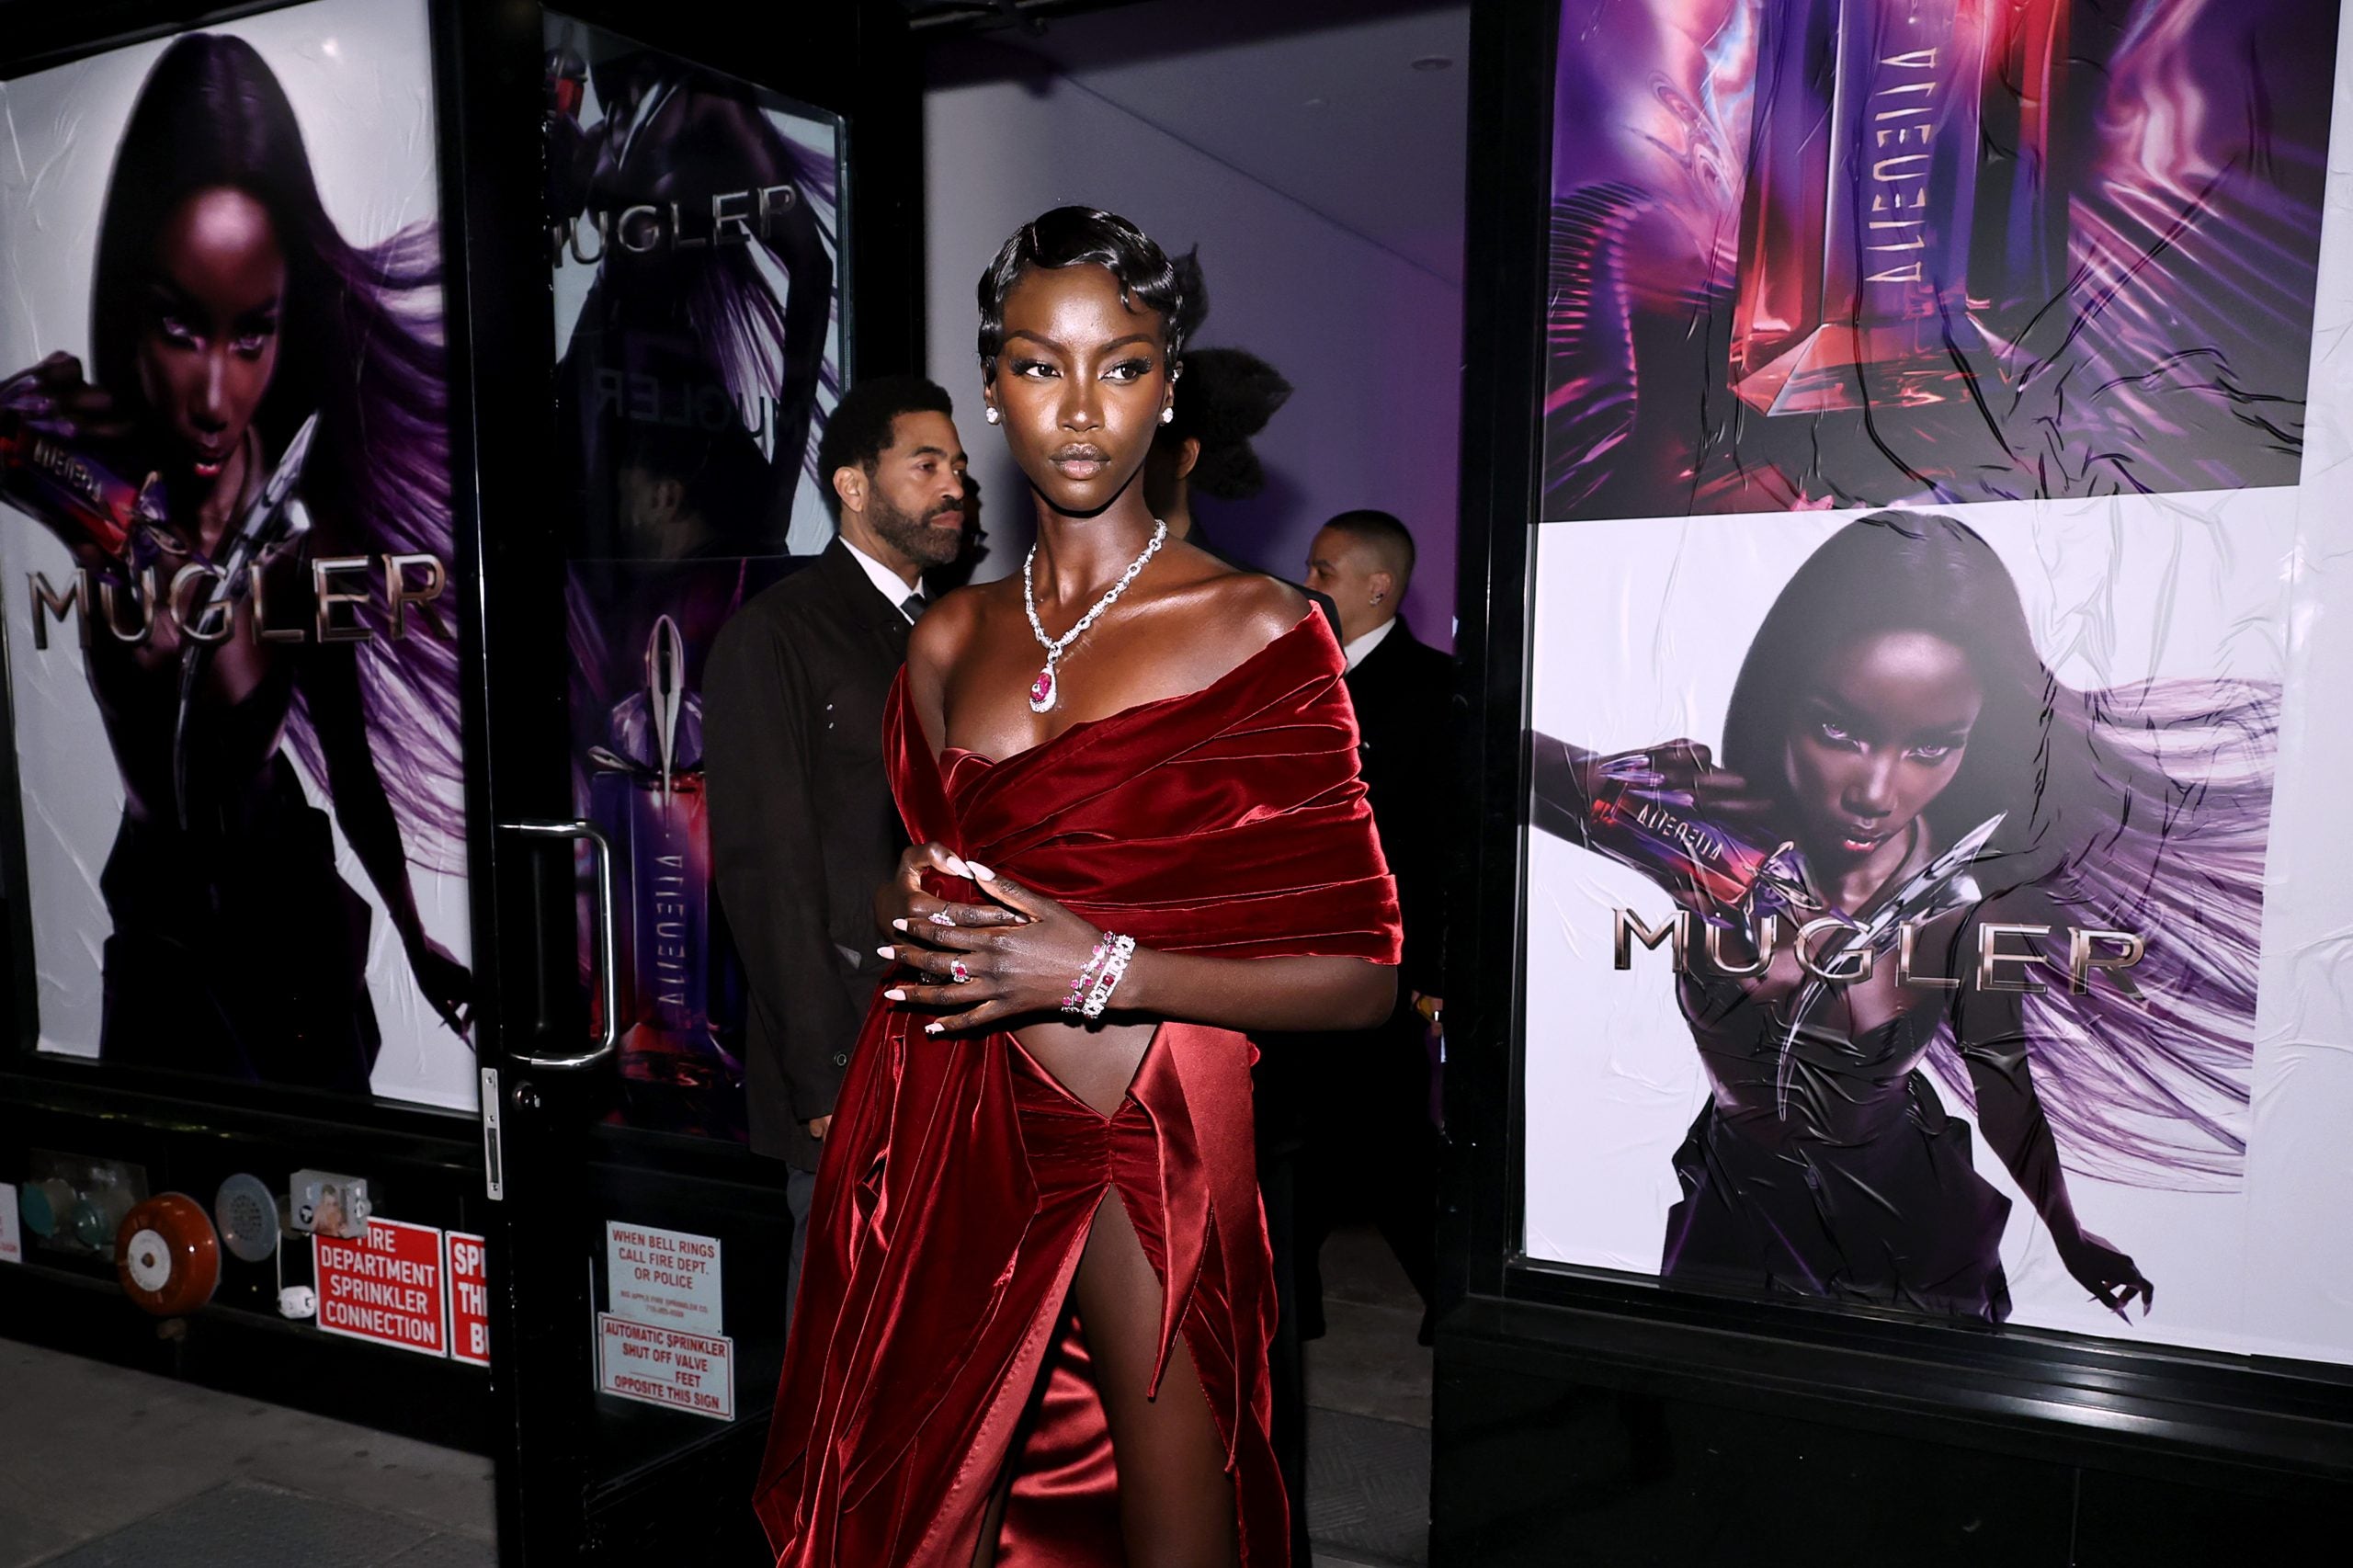 Anok Yai Is Gorgeous In Maroon At Mugler’s Fragrance Launch Party